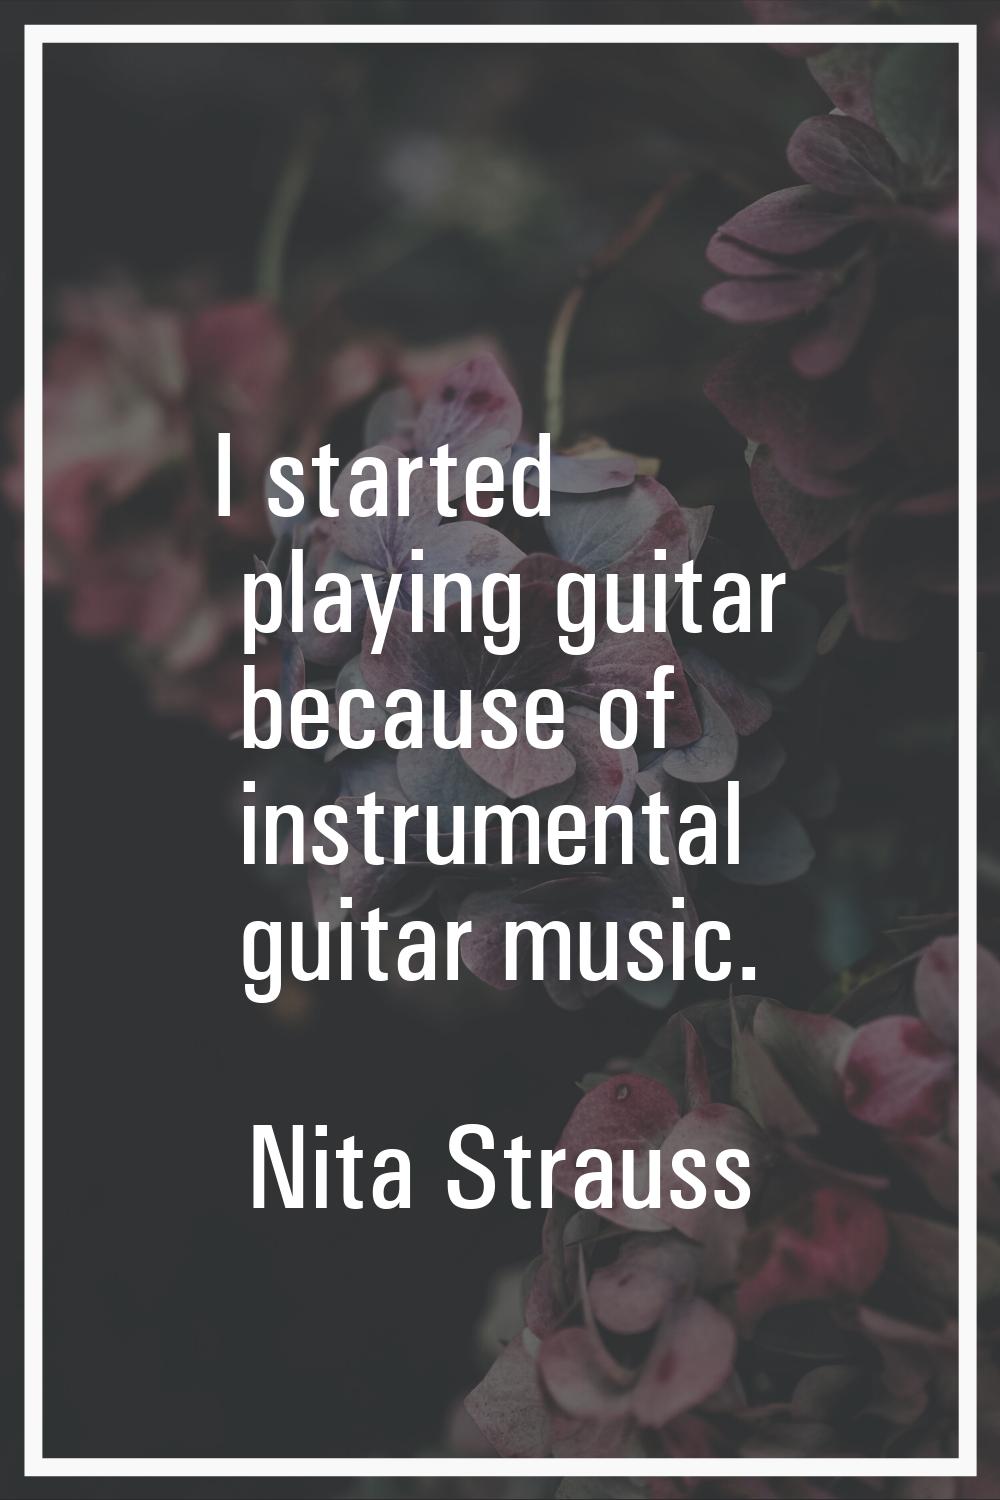 I started playing guitar because of instrumental guitar music.